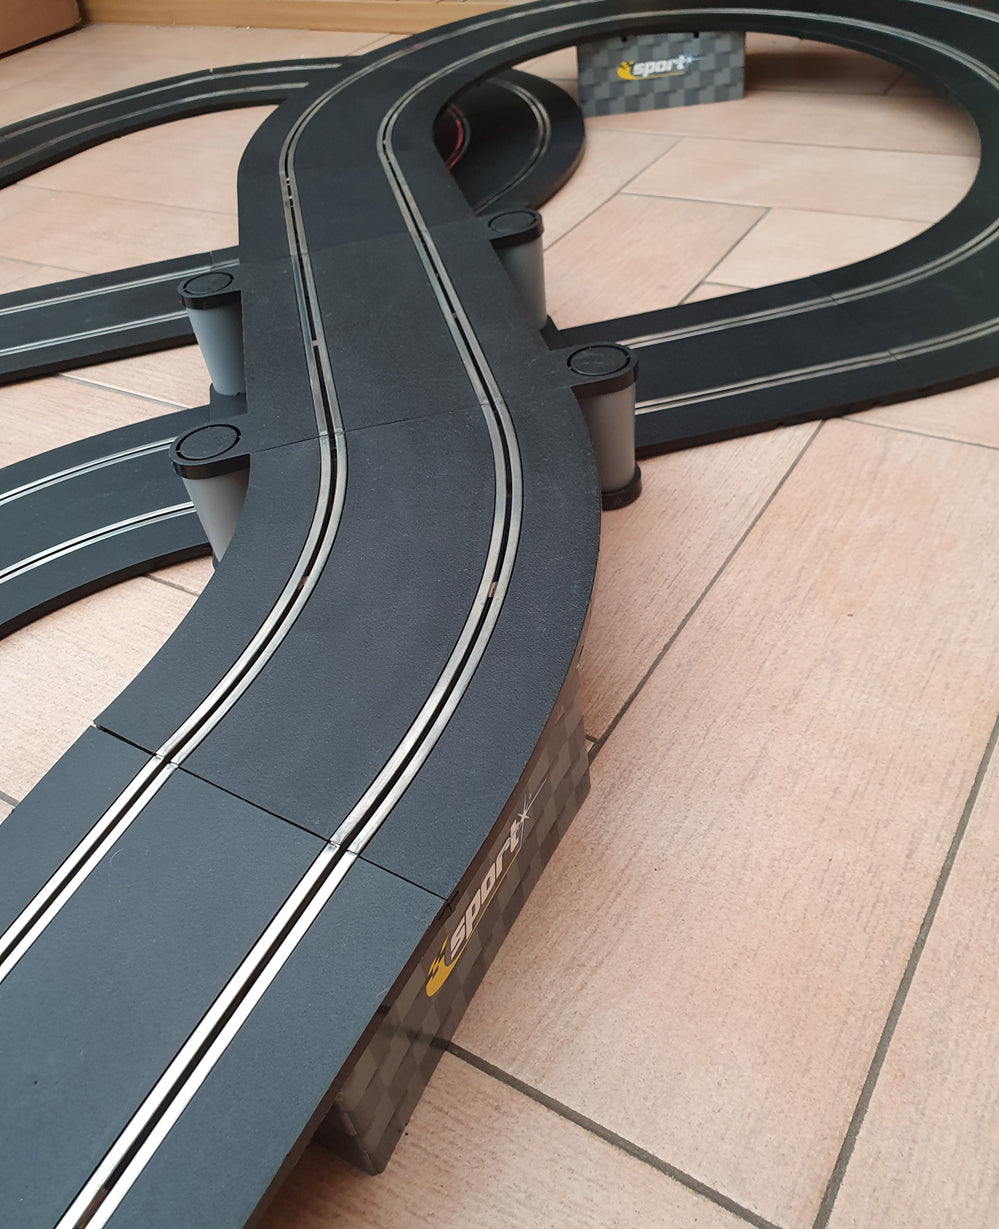 Scalextric Sport 1:32 Track Set Layout With McLaren Cars DIGITAL #AS9